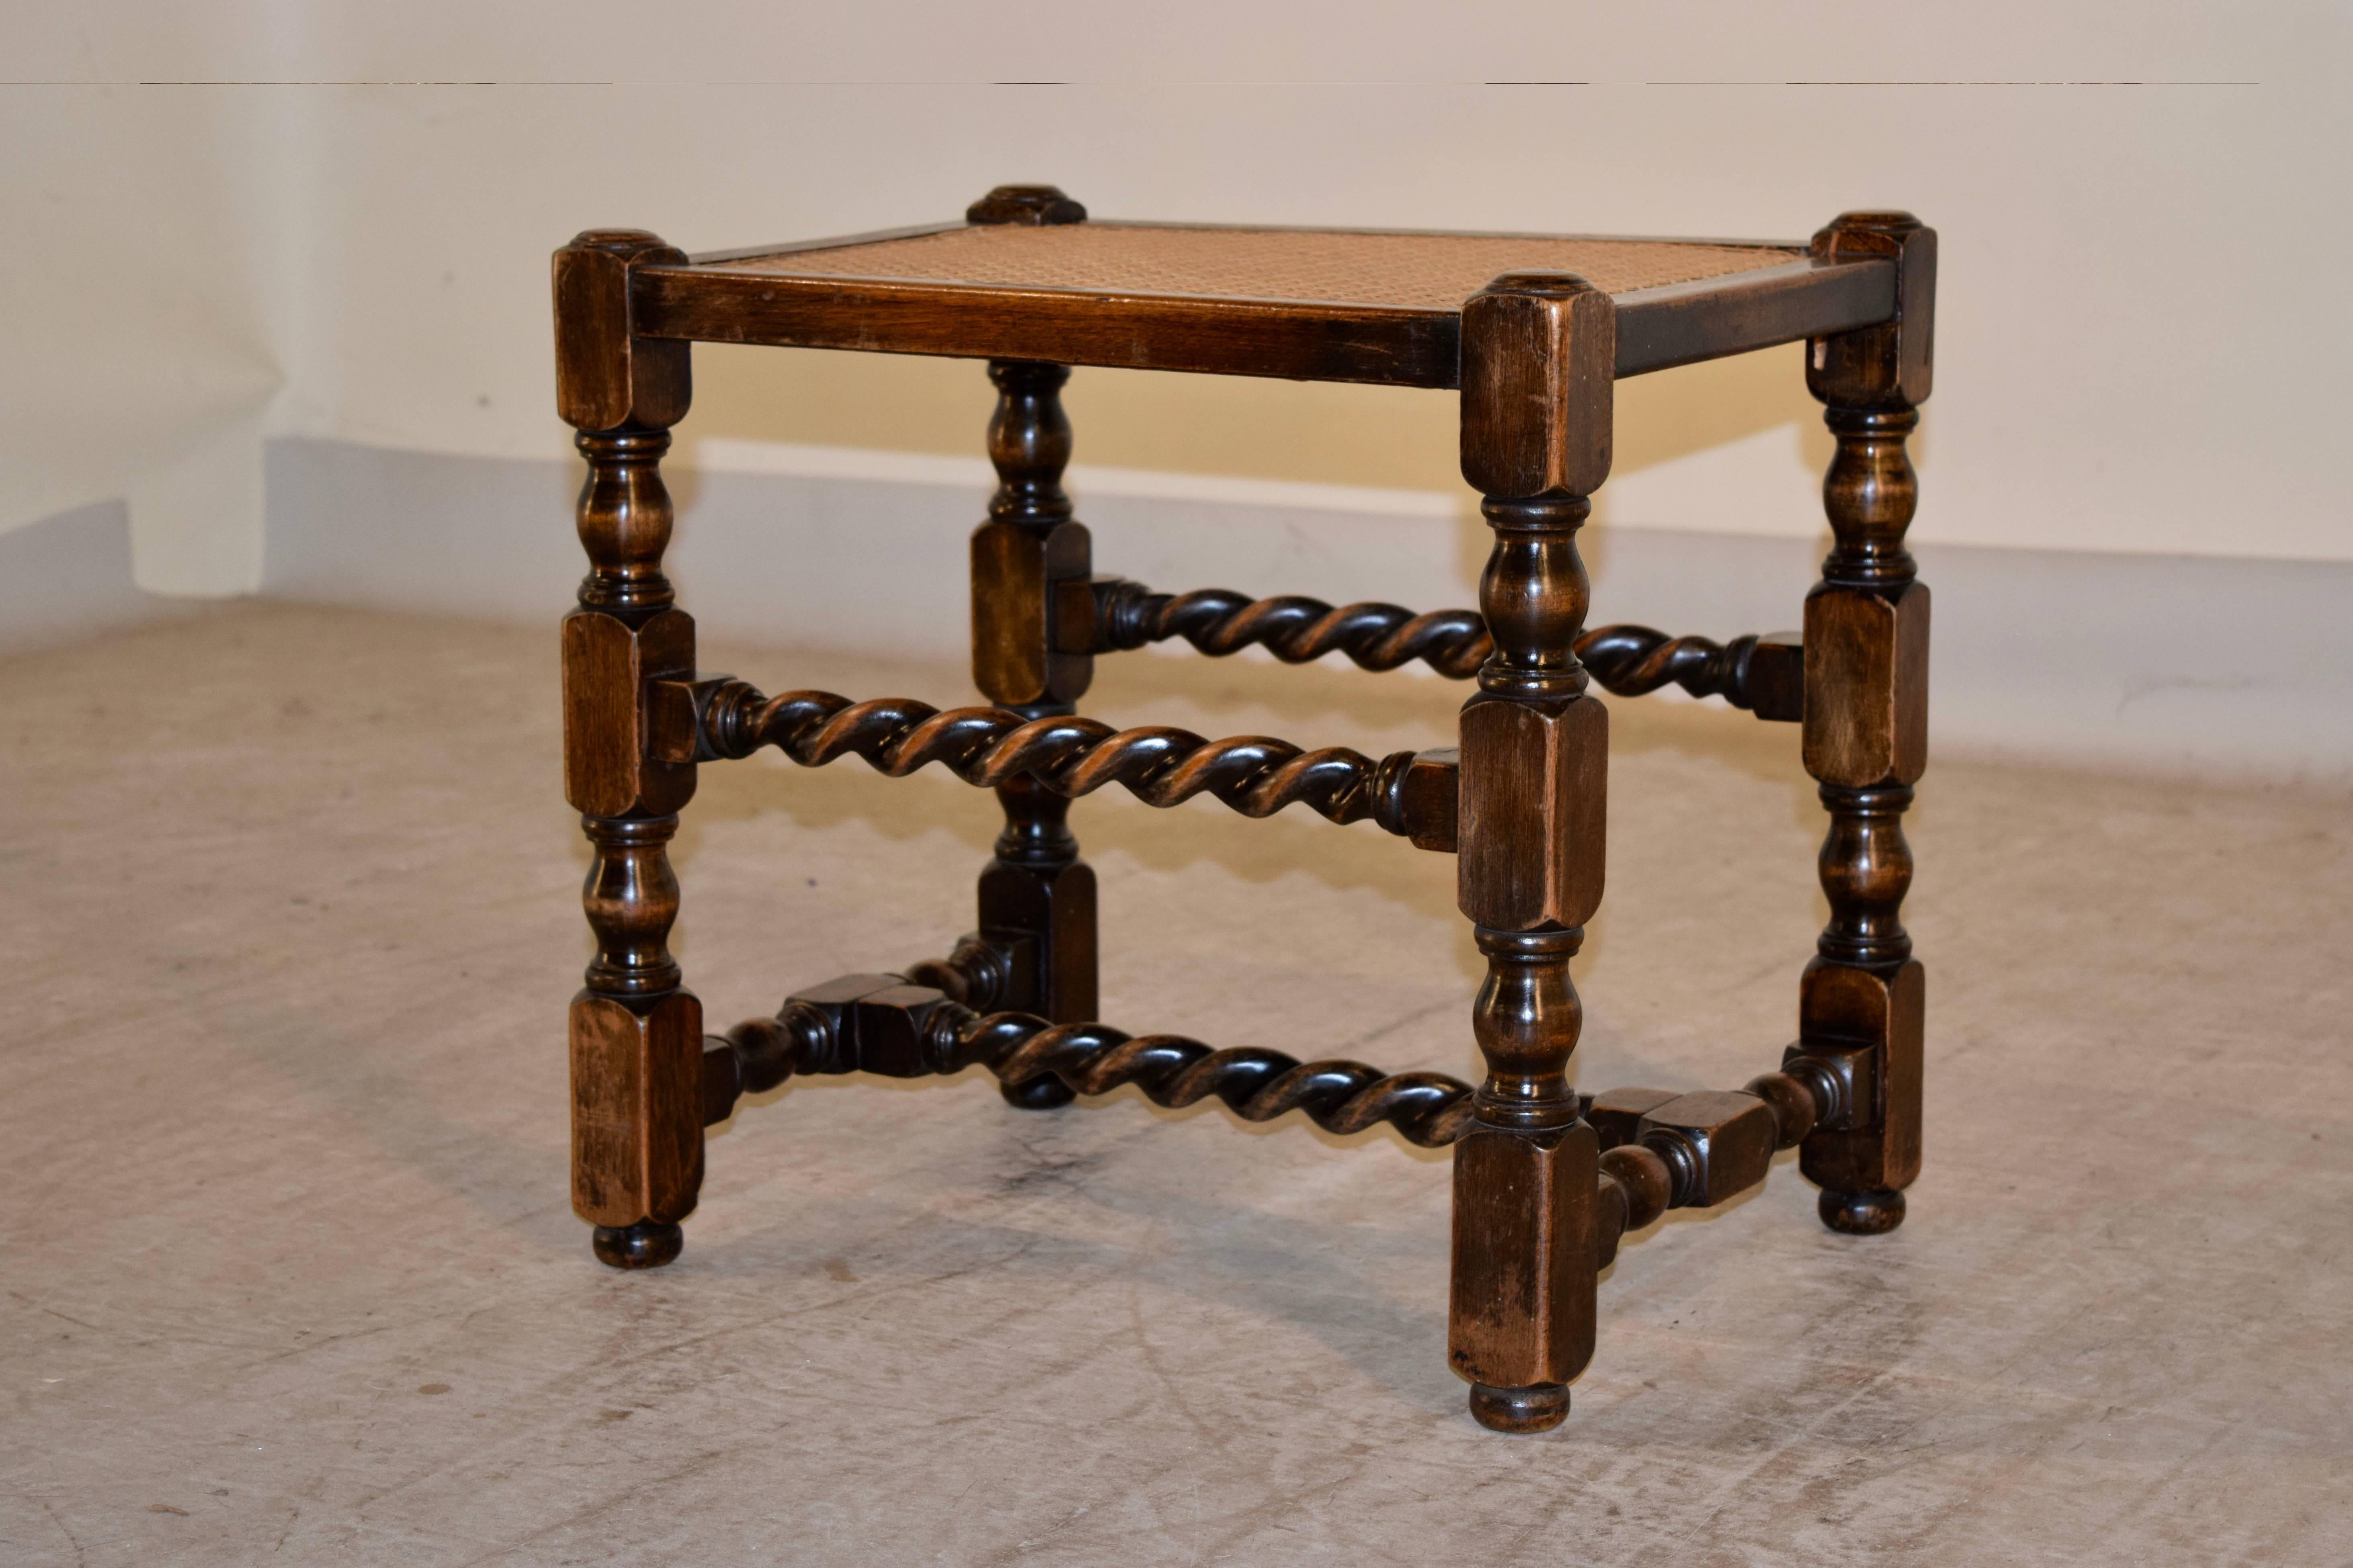 19th century English oak stool with a handwoven cane seat, following down to hand-turned legs, joined by hand-turned barley twist stretchers.